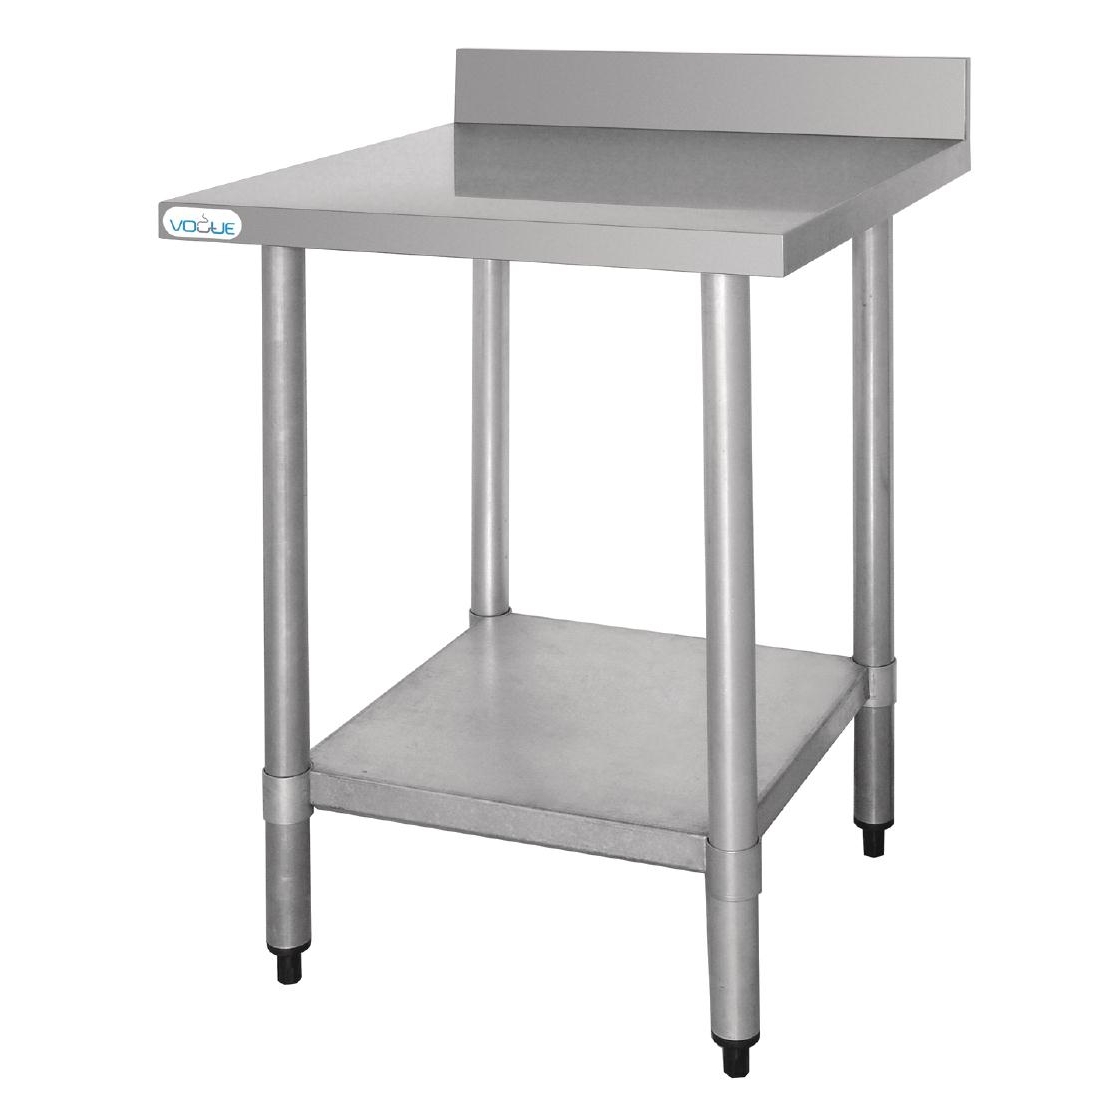 W mm Vogue Table Shelf Made of Stainless Steel 600x900mm 900 D x 600 